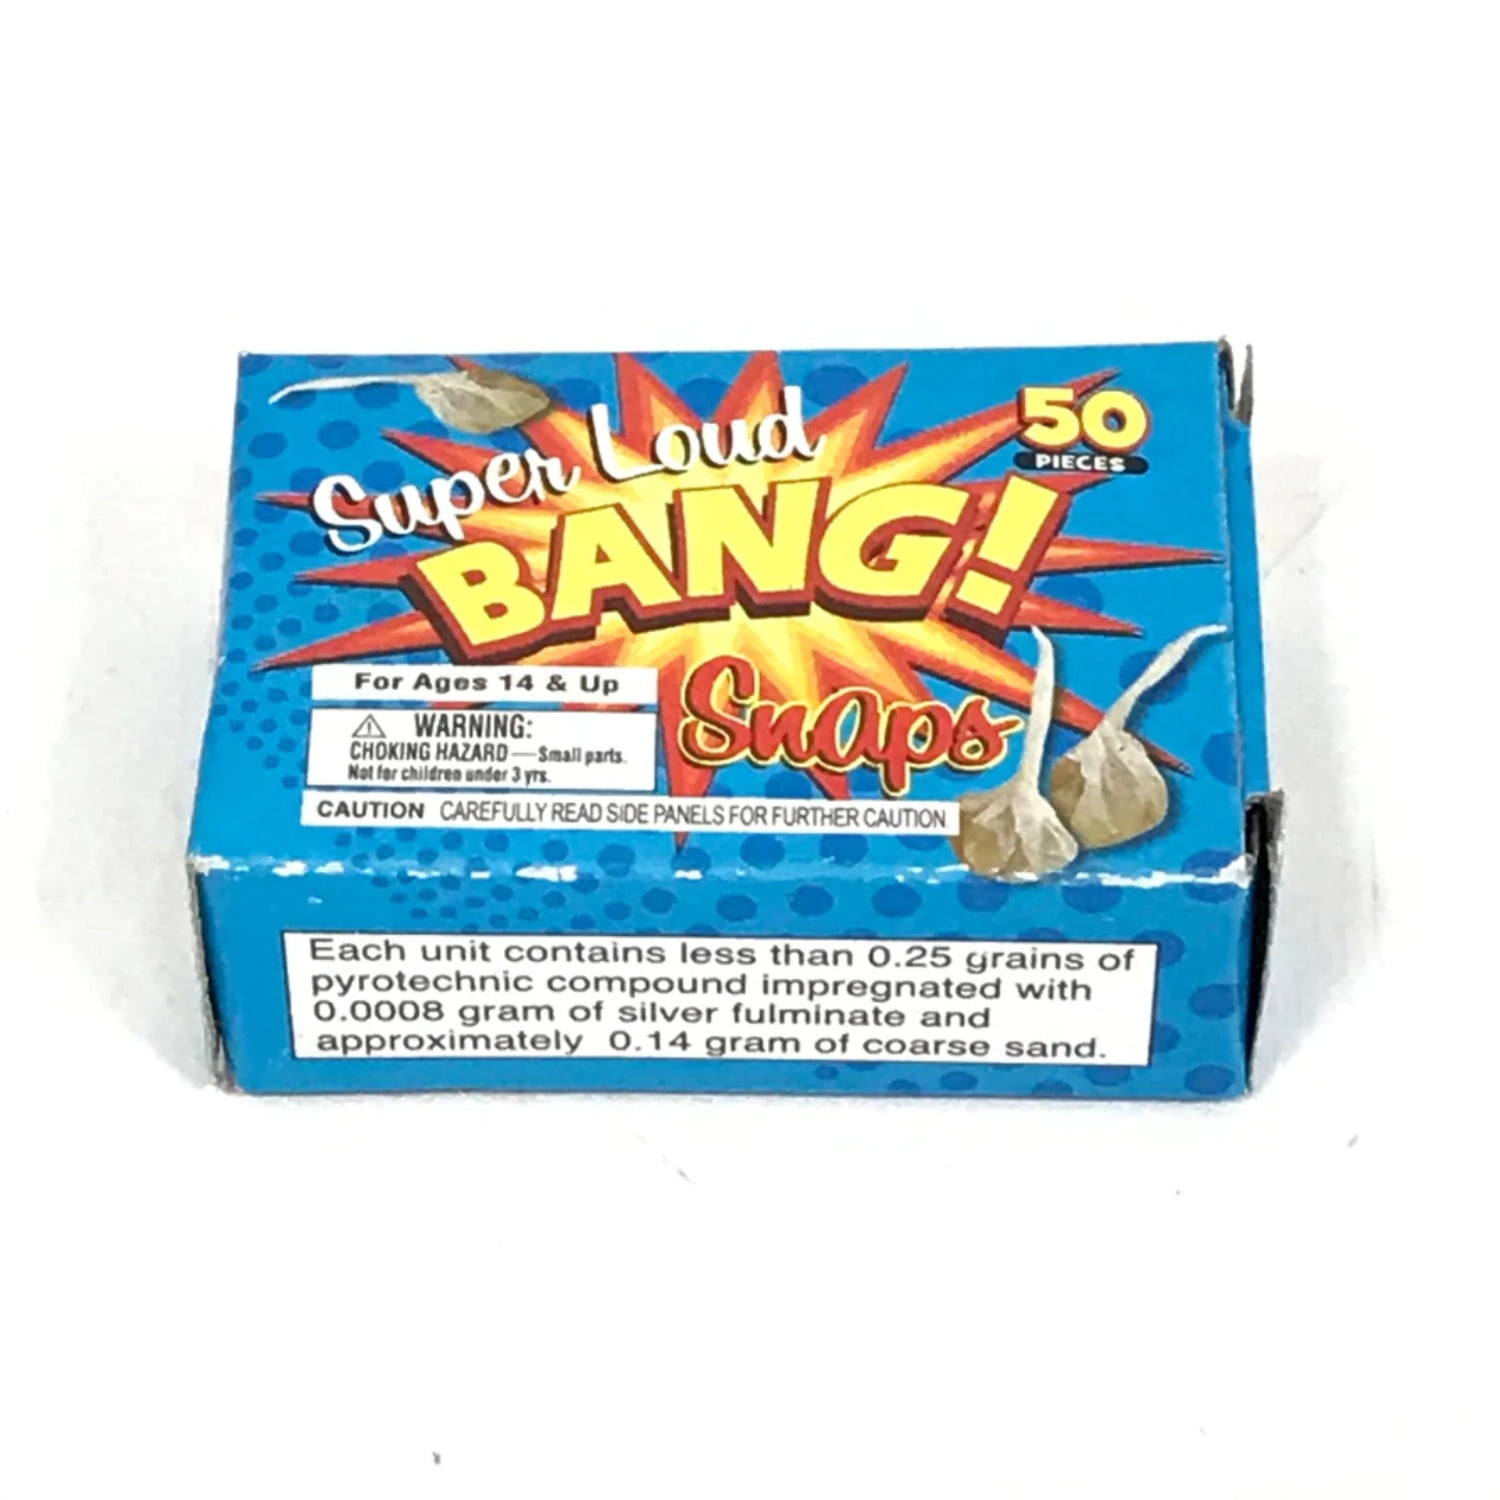 500 Bang Party Snaps Snap Pop Pop Snapper Throwing Poppers Trick Noise  Maker 